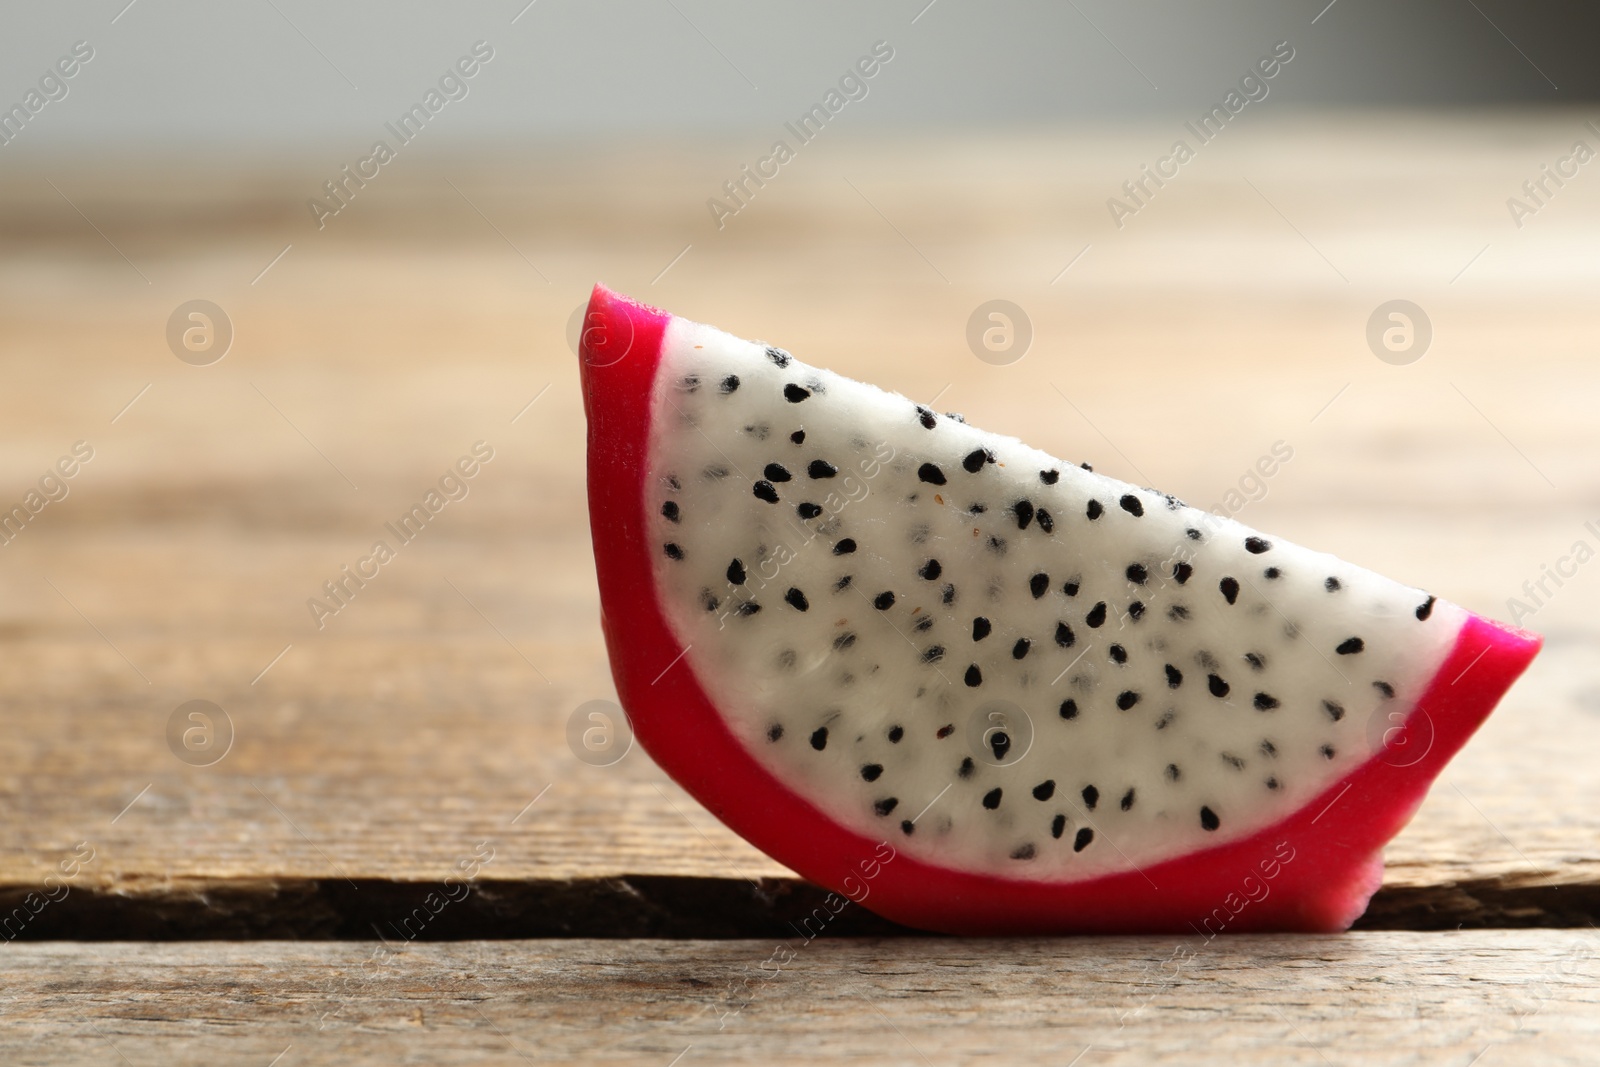 Photo of Slice of delicious ripe dragon fruit (pitahaya) on wooden table